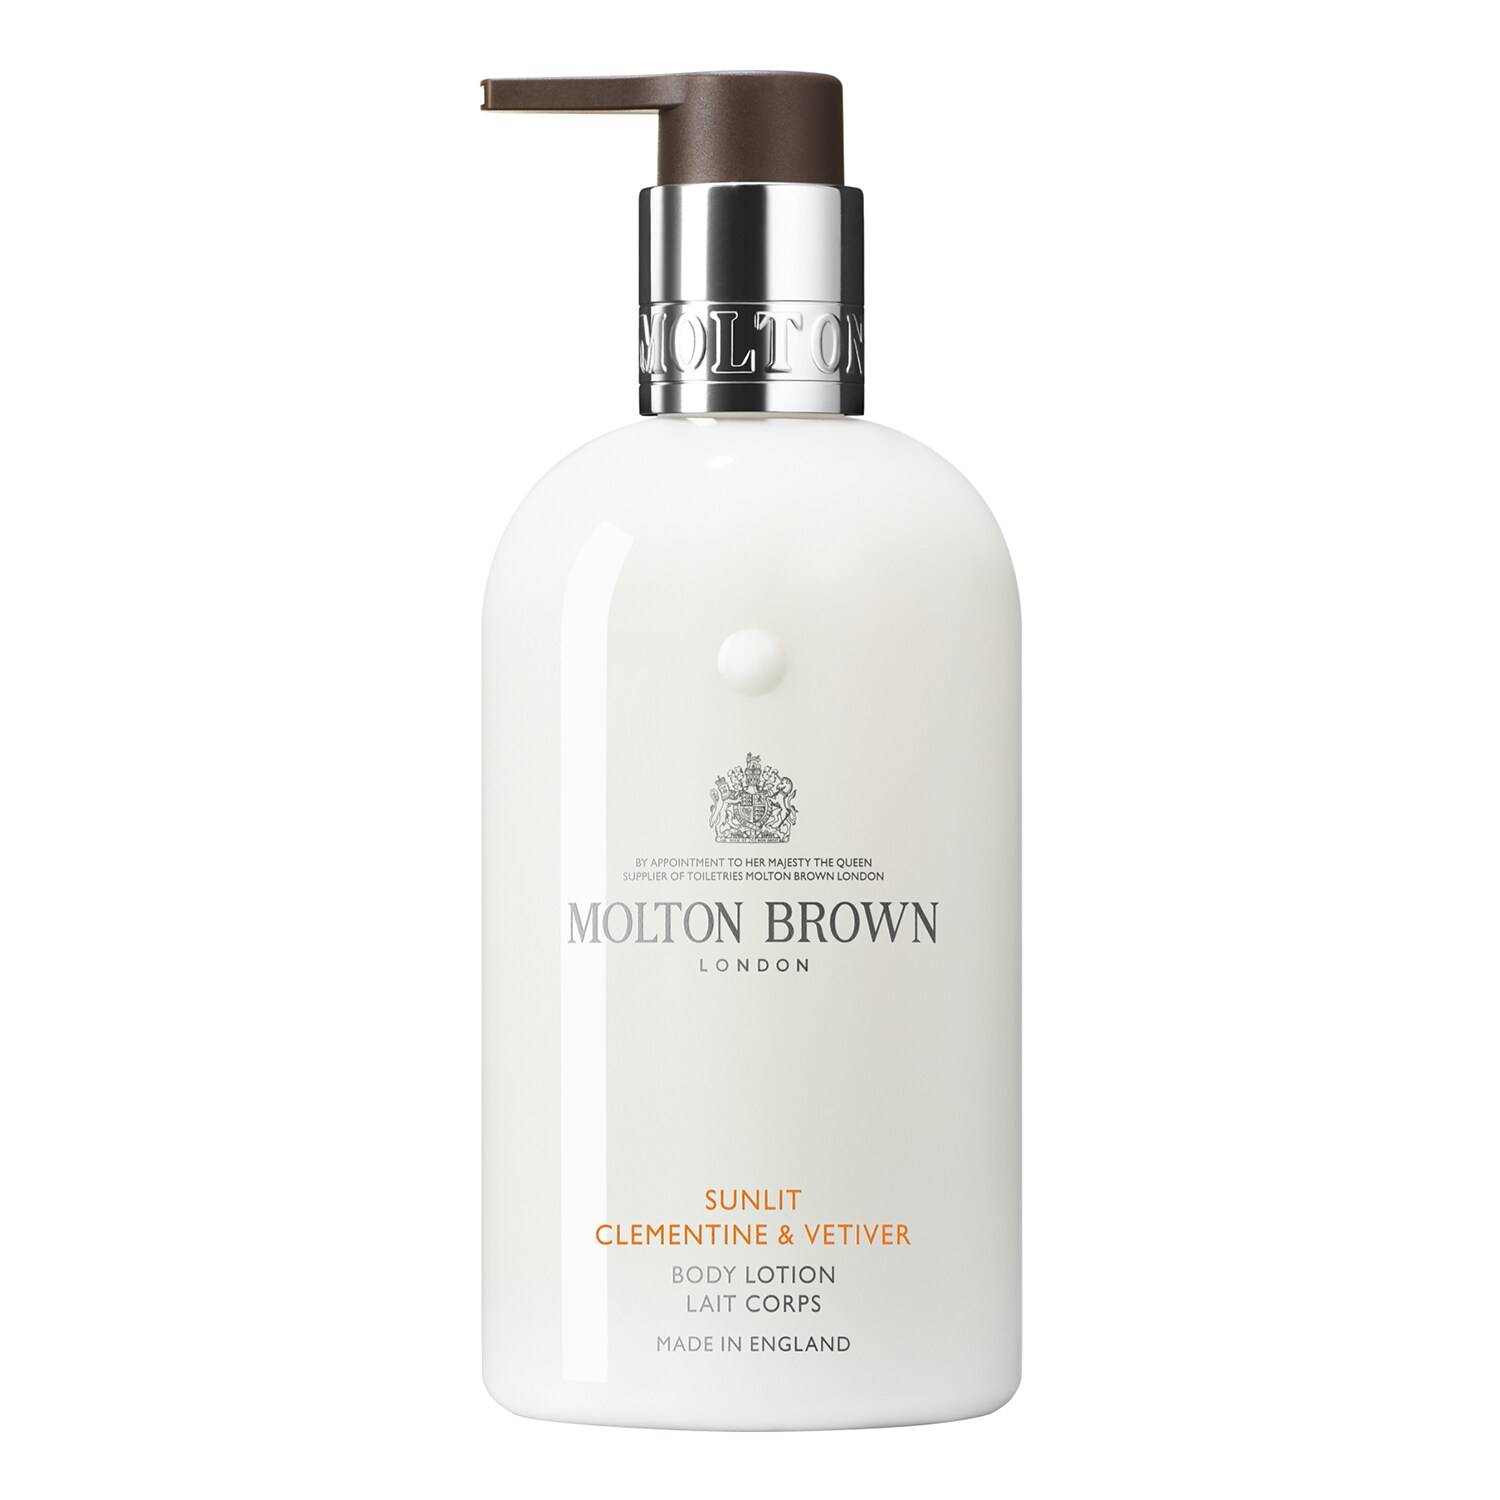 Molton Brown Sunlit Clementine & Vetiver Body Lotion 300Ml